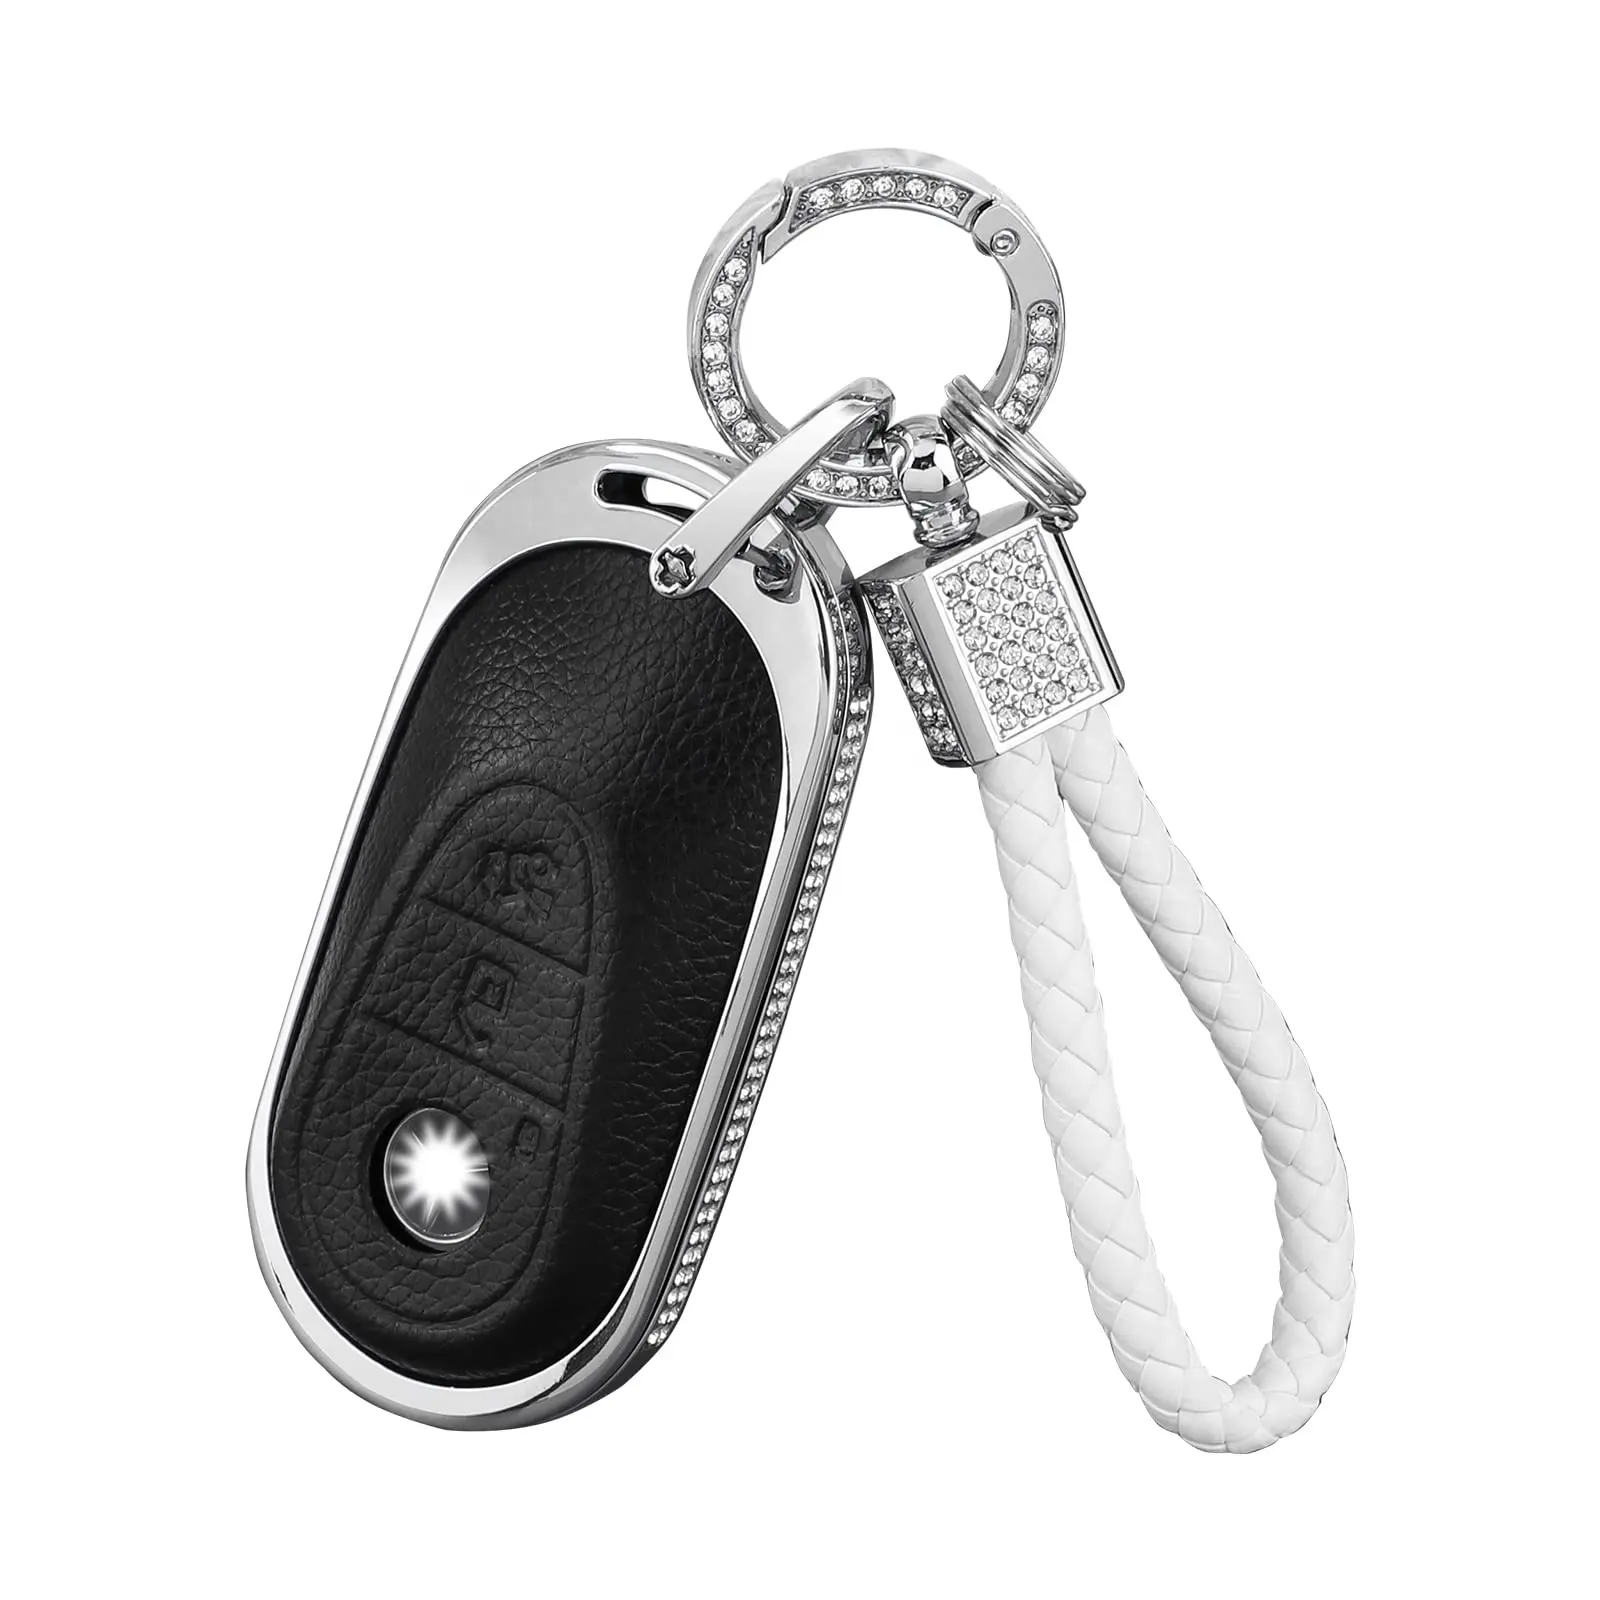 Leather Key Fob Cover for 2022 Mercedes Benz Accessories S-Class C-Class SL-Class W223 S580 Bling Key Case Protector Key Shell